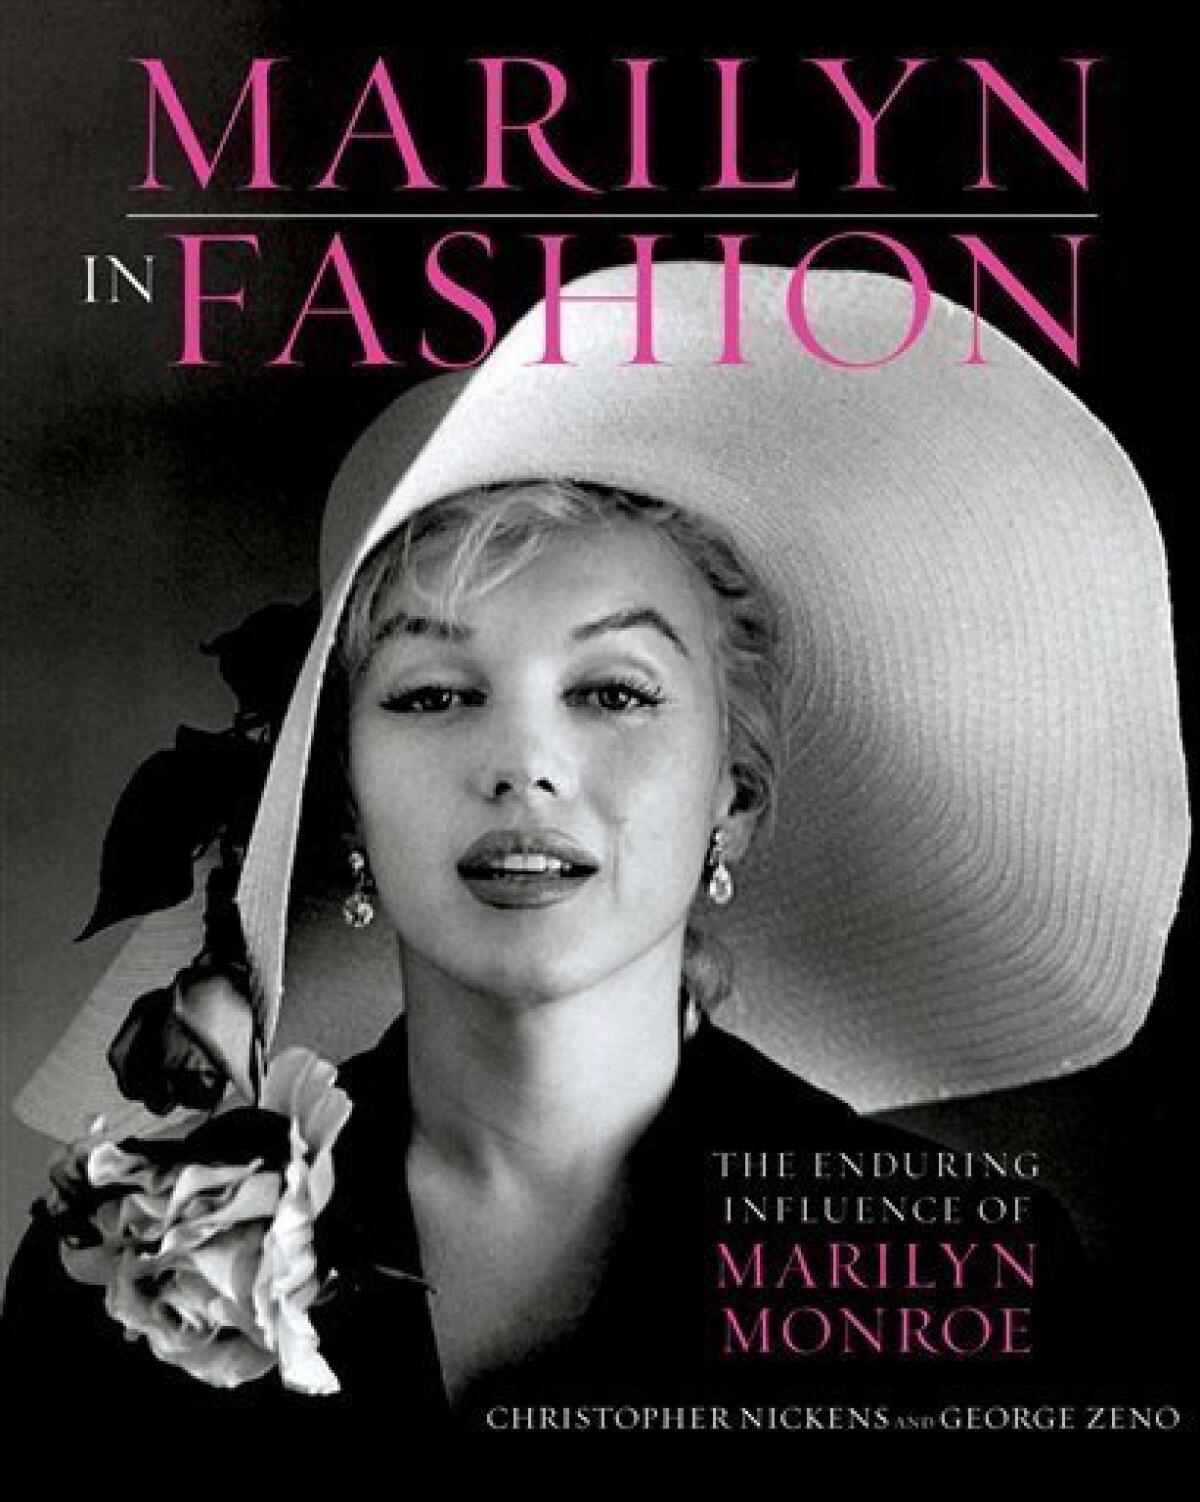 The Personal Property of Marilyn Monroe: A Pucci Dress - The Marilyn Monroe  Collection